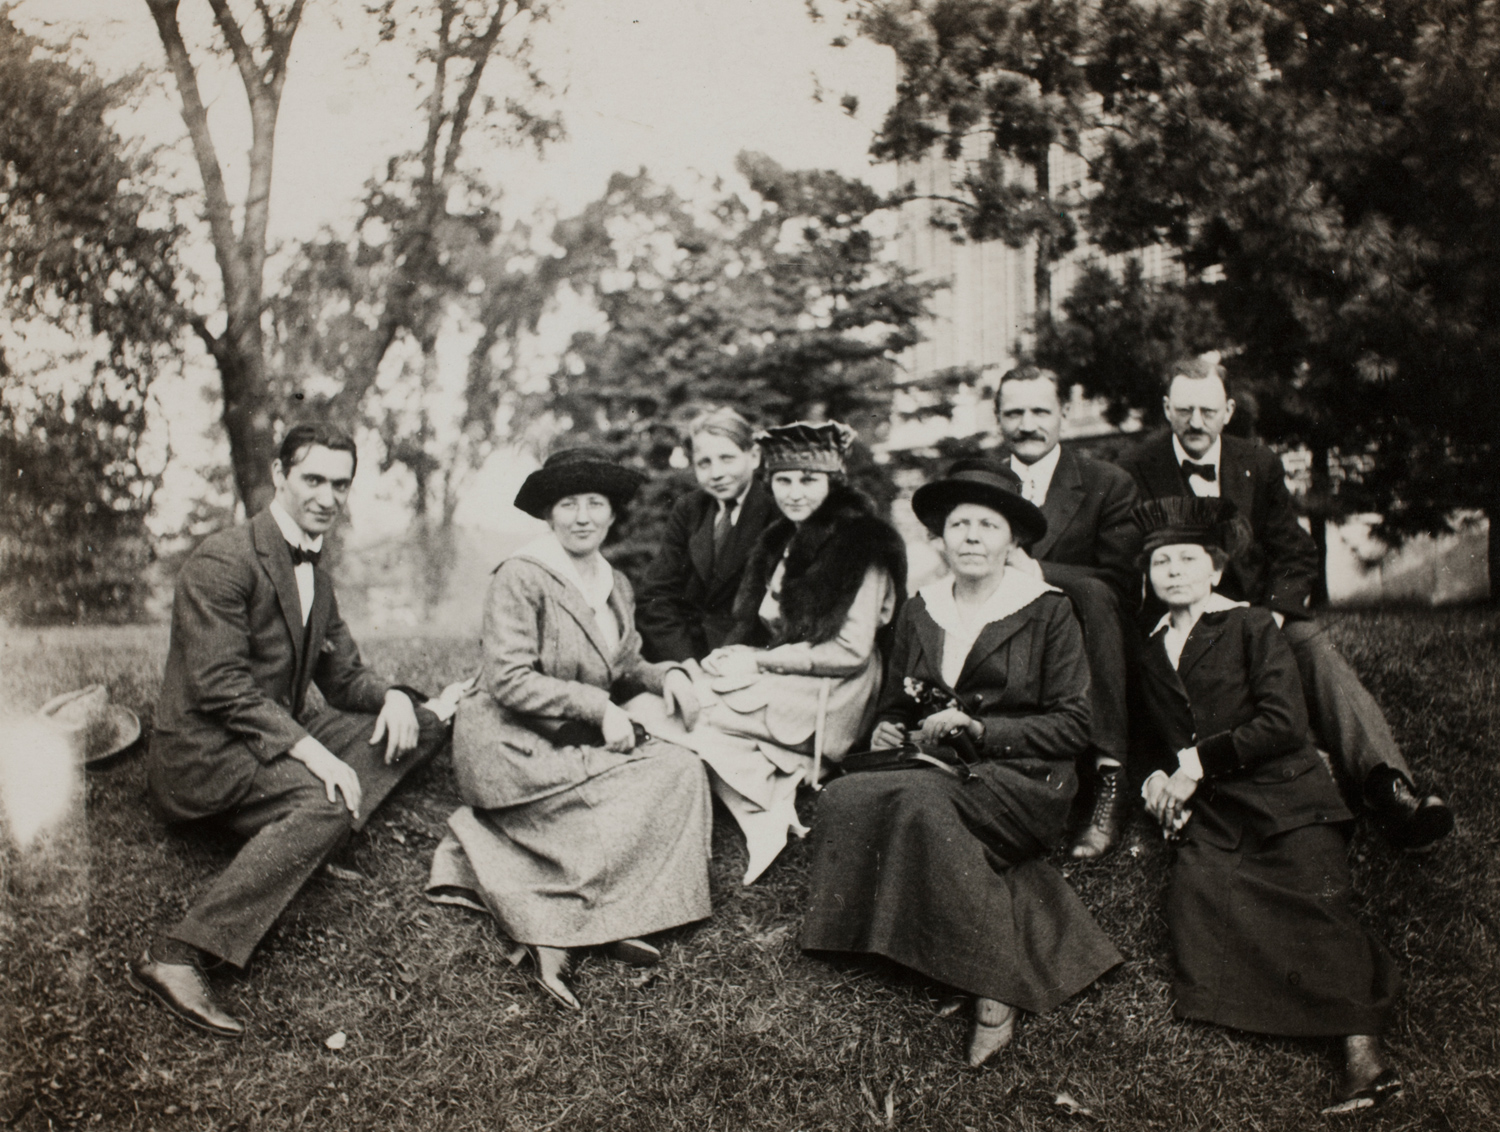 Nickolas Muray with family and friends, 1914
                              
                              
                              George Eastman House Collection, Gift of Mrs. Nickolas Muray; Nickolas Muray Photo Archives, courtesy of George Eastman House